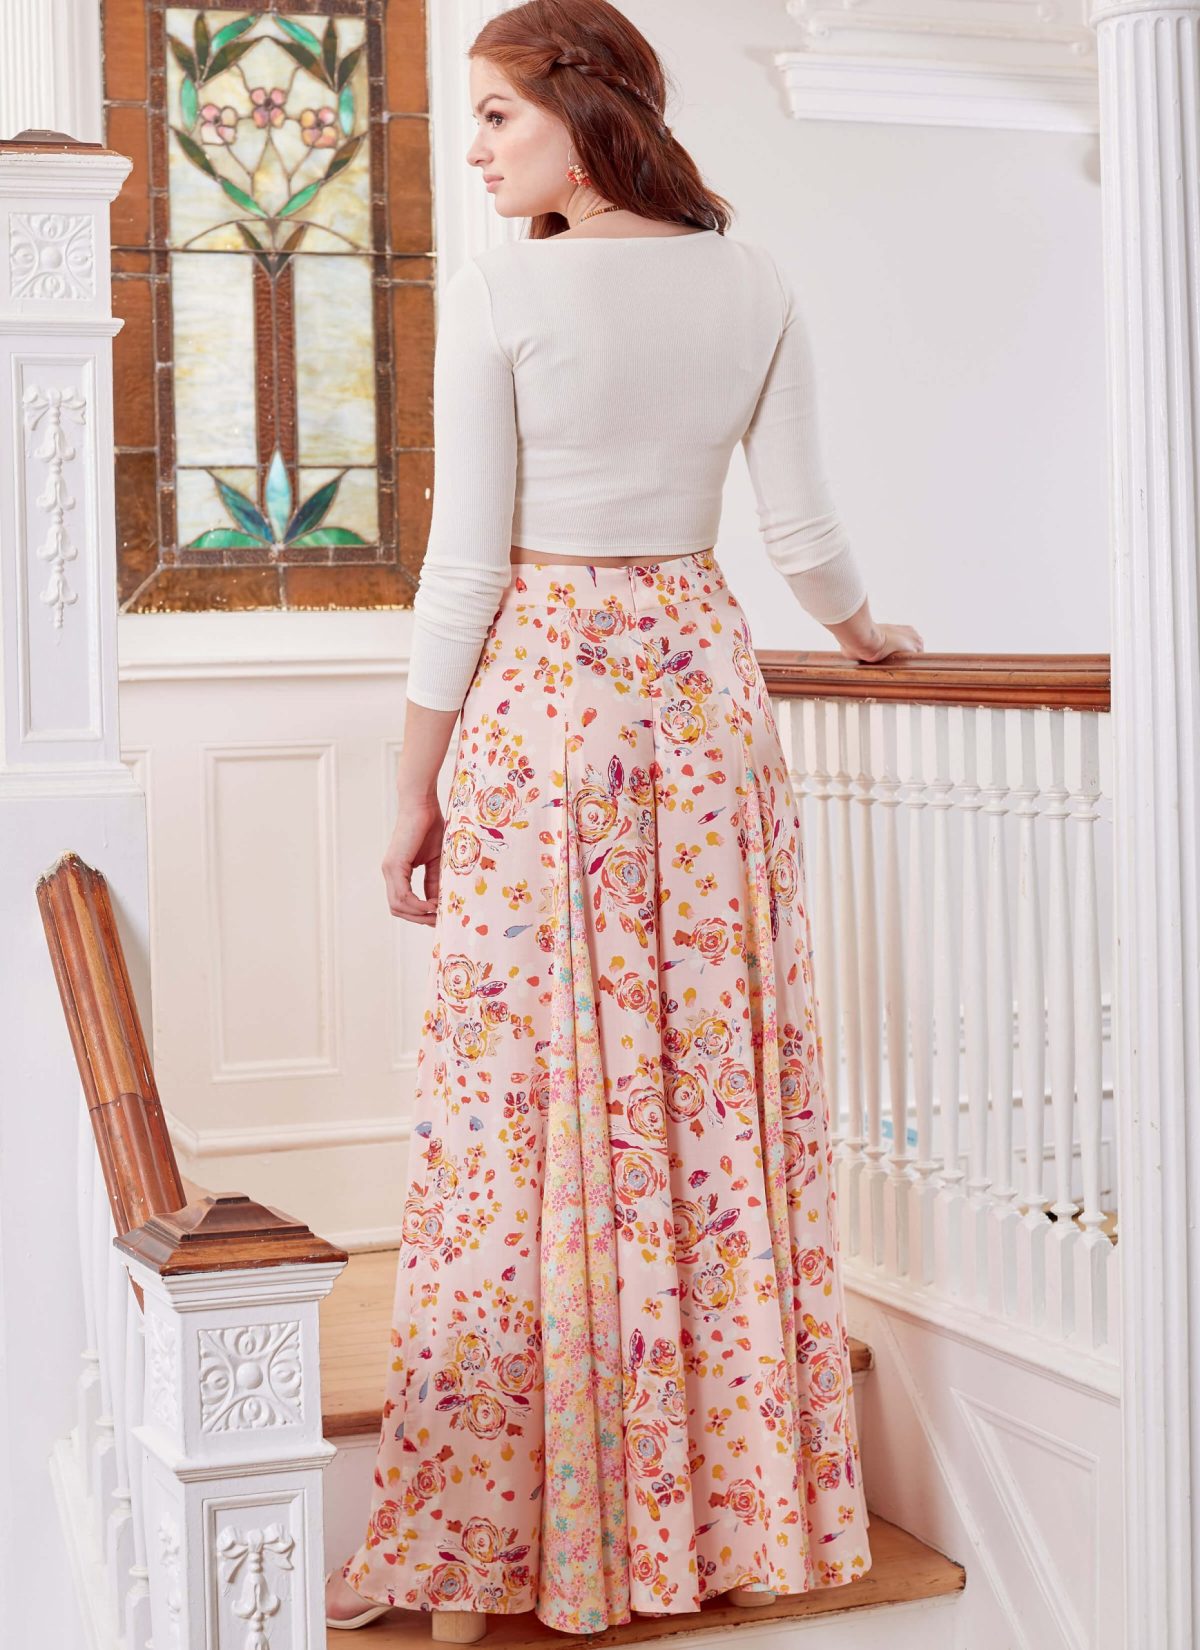 McCall's Sewing Pattern M8223 Misses' Trousers